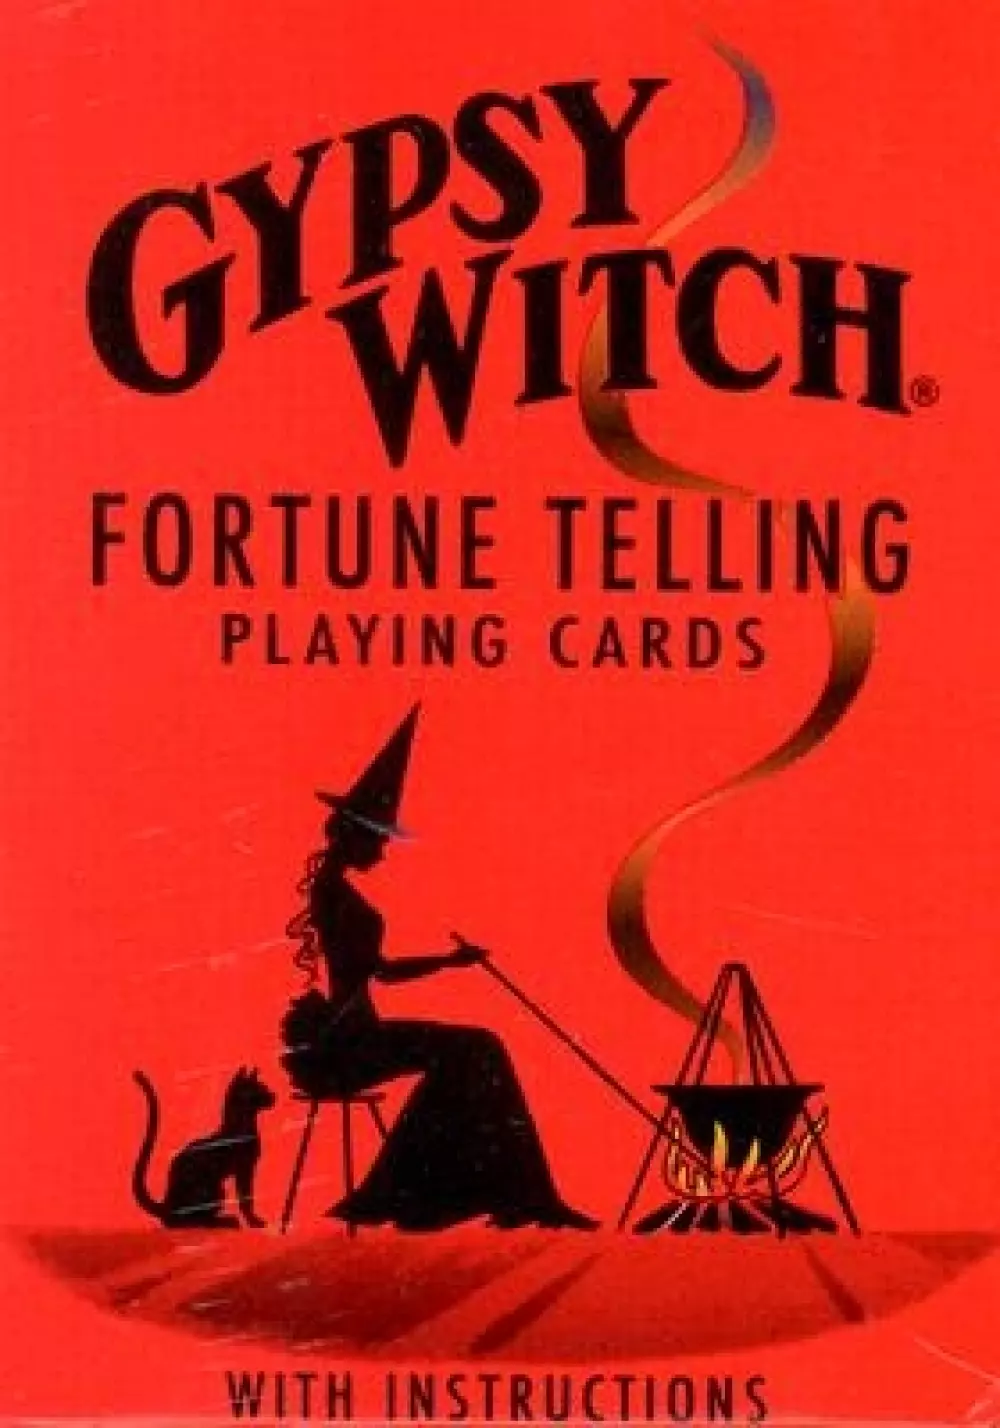 Gypsy Witch Fortune Telling Playing Cards Gypsy witch fortune telling cards GW10 9780880790413 Tarot & orakel Andre kort